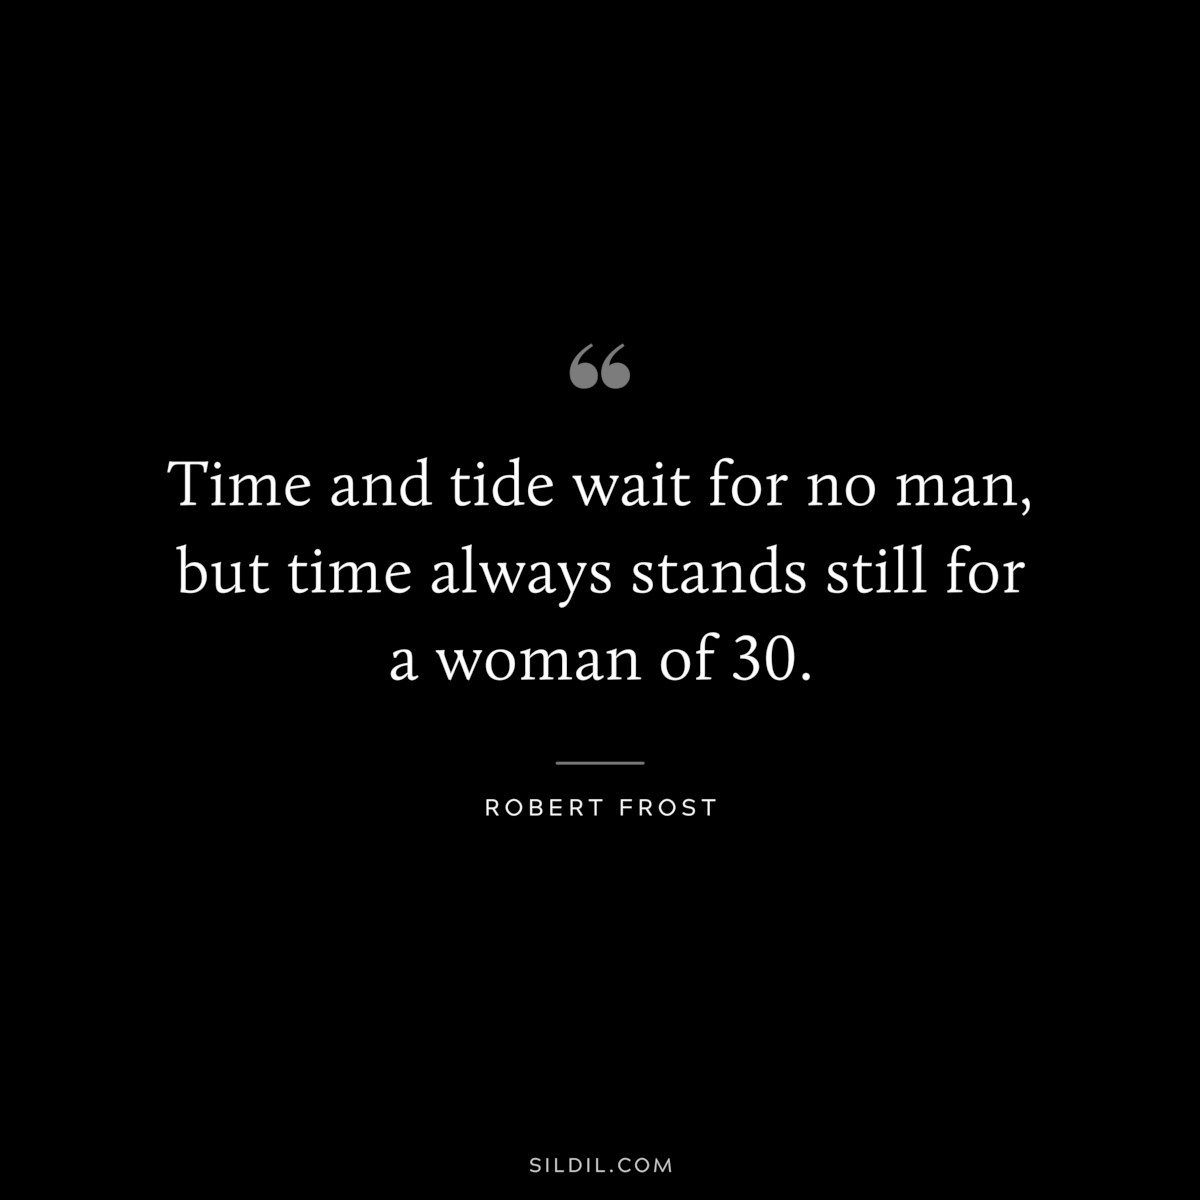 Time and tide wait for no man, but time always stands still for a woman of 30. ― Robert Frost